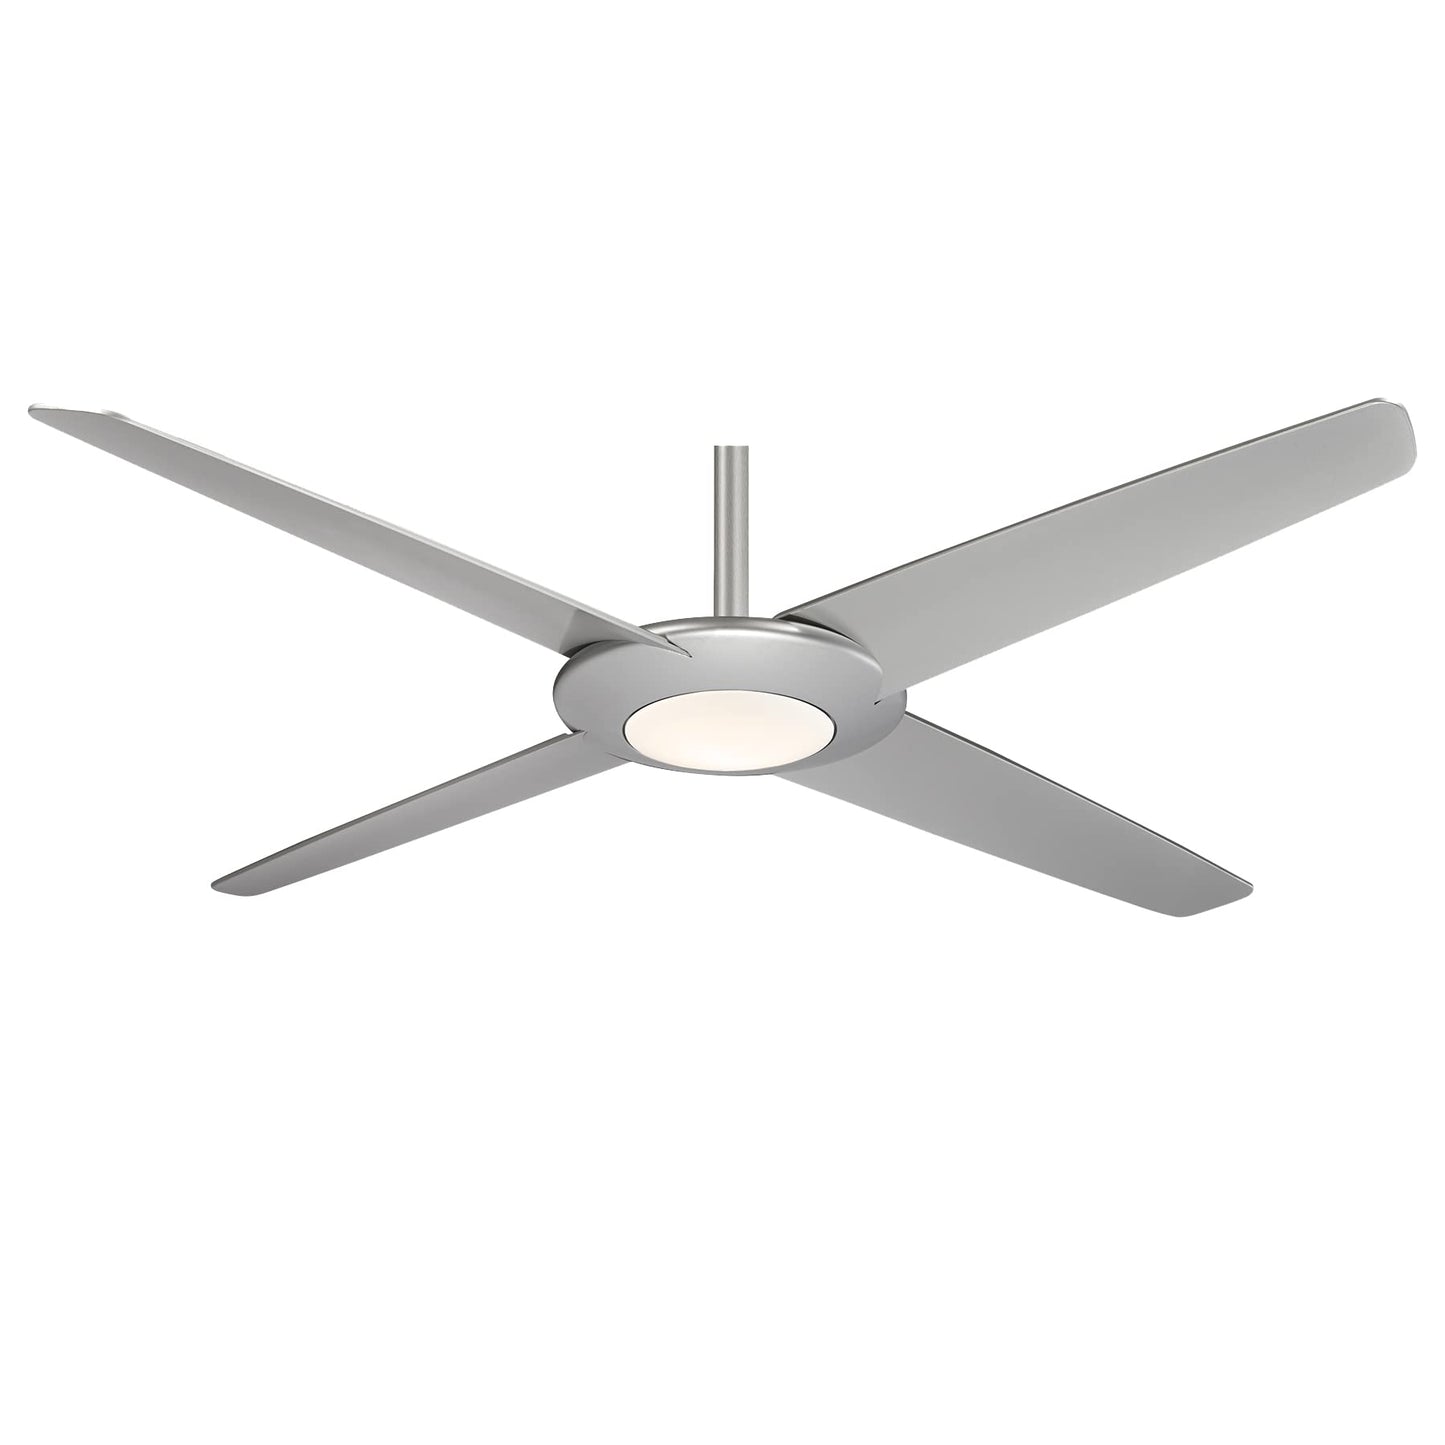 MINKA-AIRE F739L-SL Pancake XL 62 Inch LED Ceiling Fan with DC Motor in Silver Finish - Like New